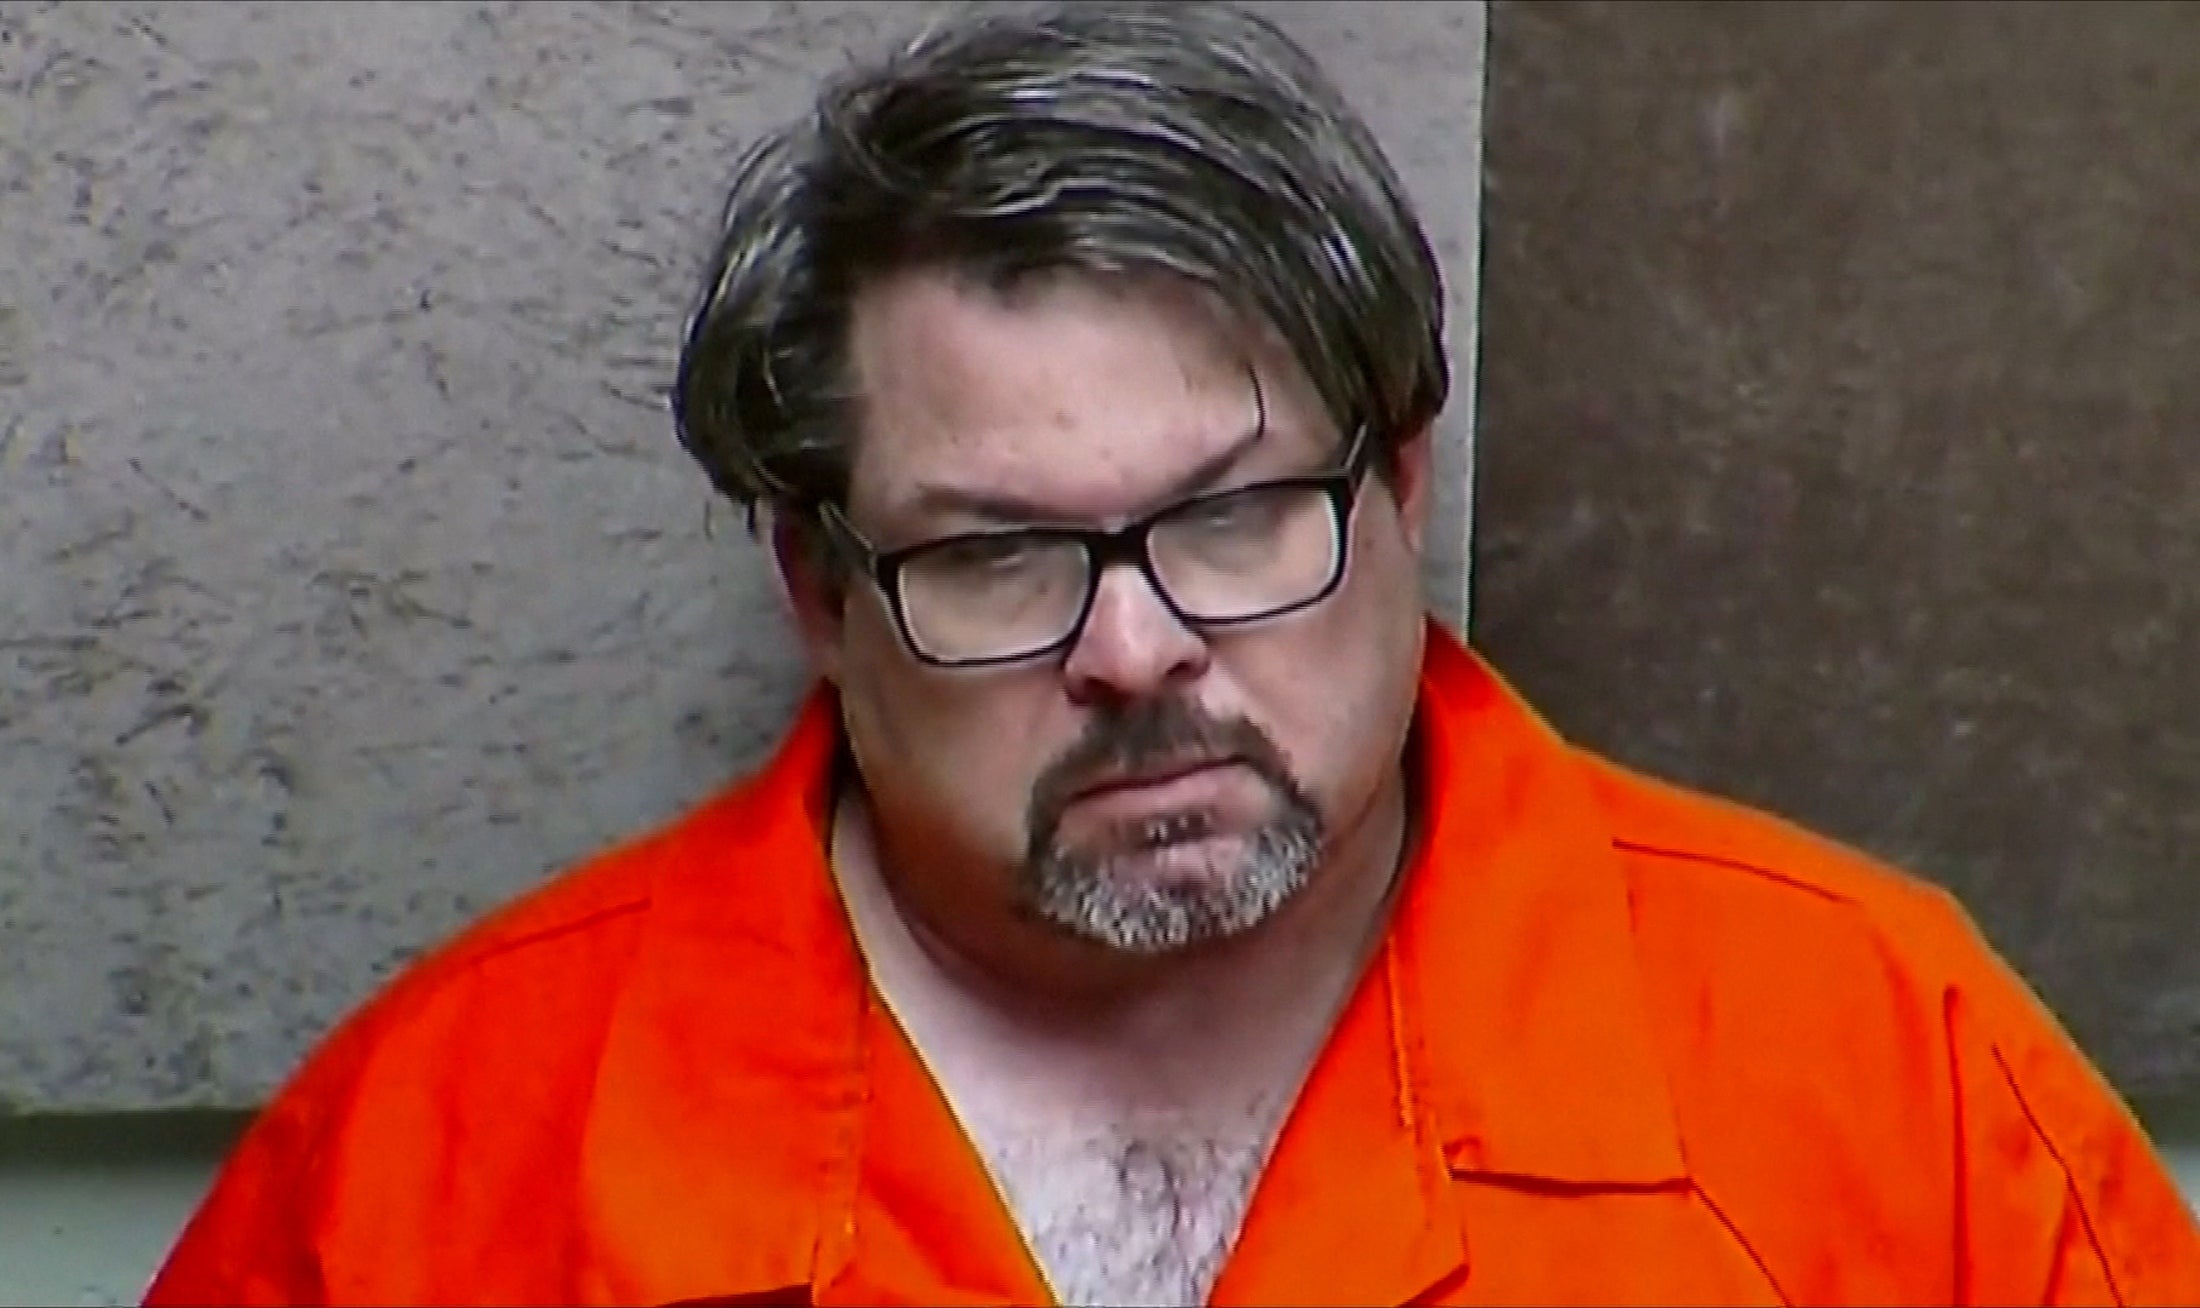 Uber driver Jason Dalton, suspected of killing six people and wounding two others, is seen on closed circuit television during his arraignment in Kalamazoo County, Michigan